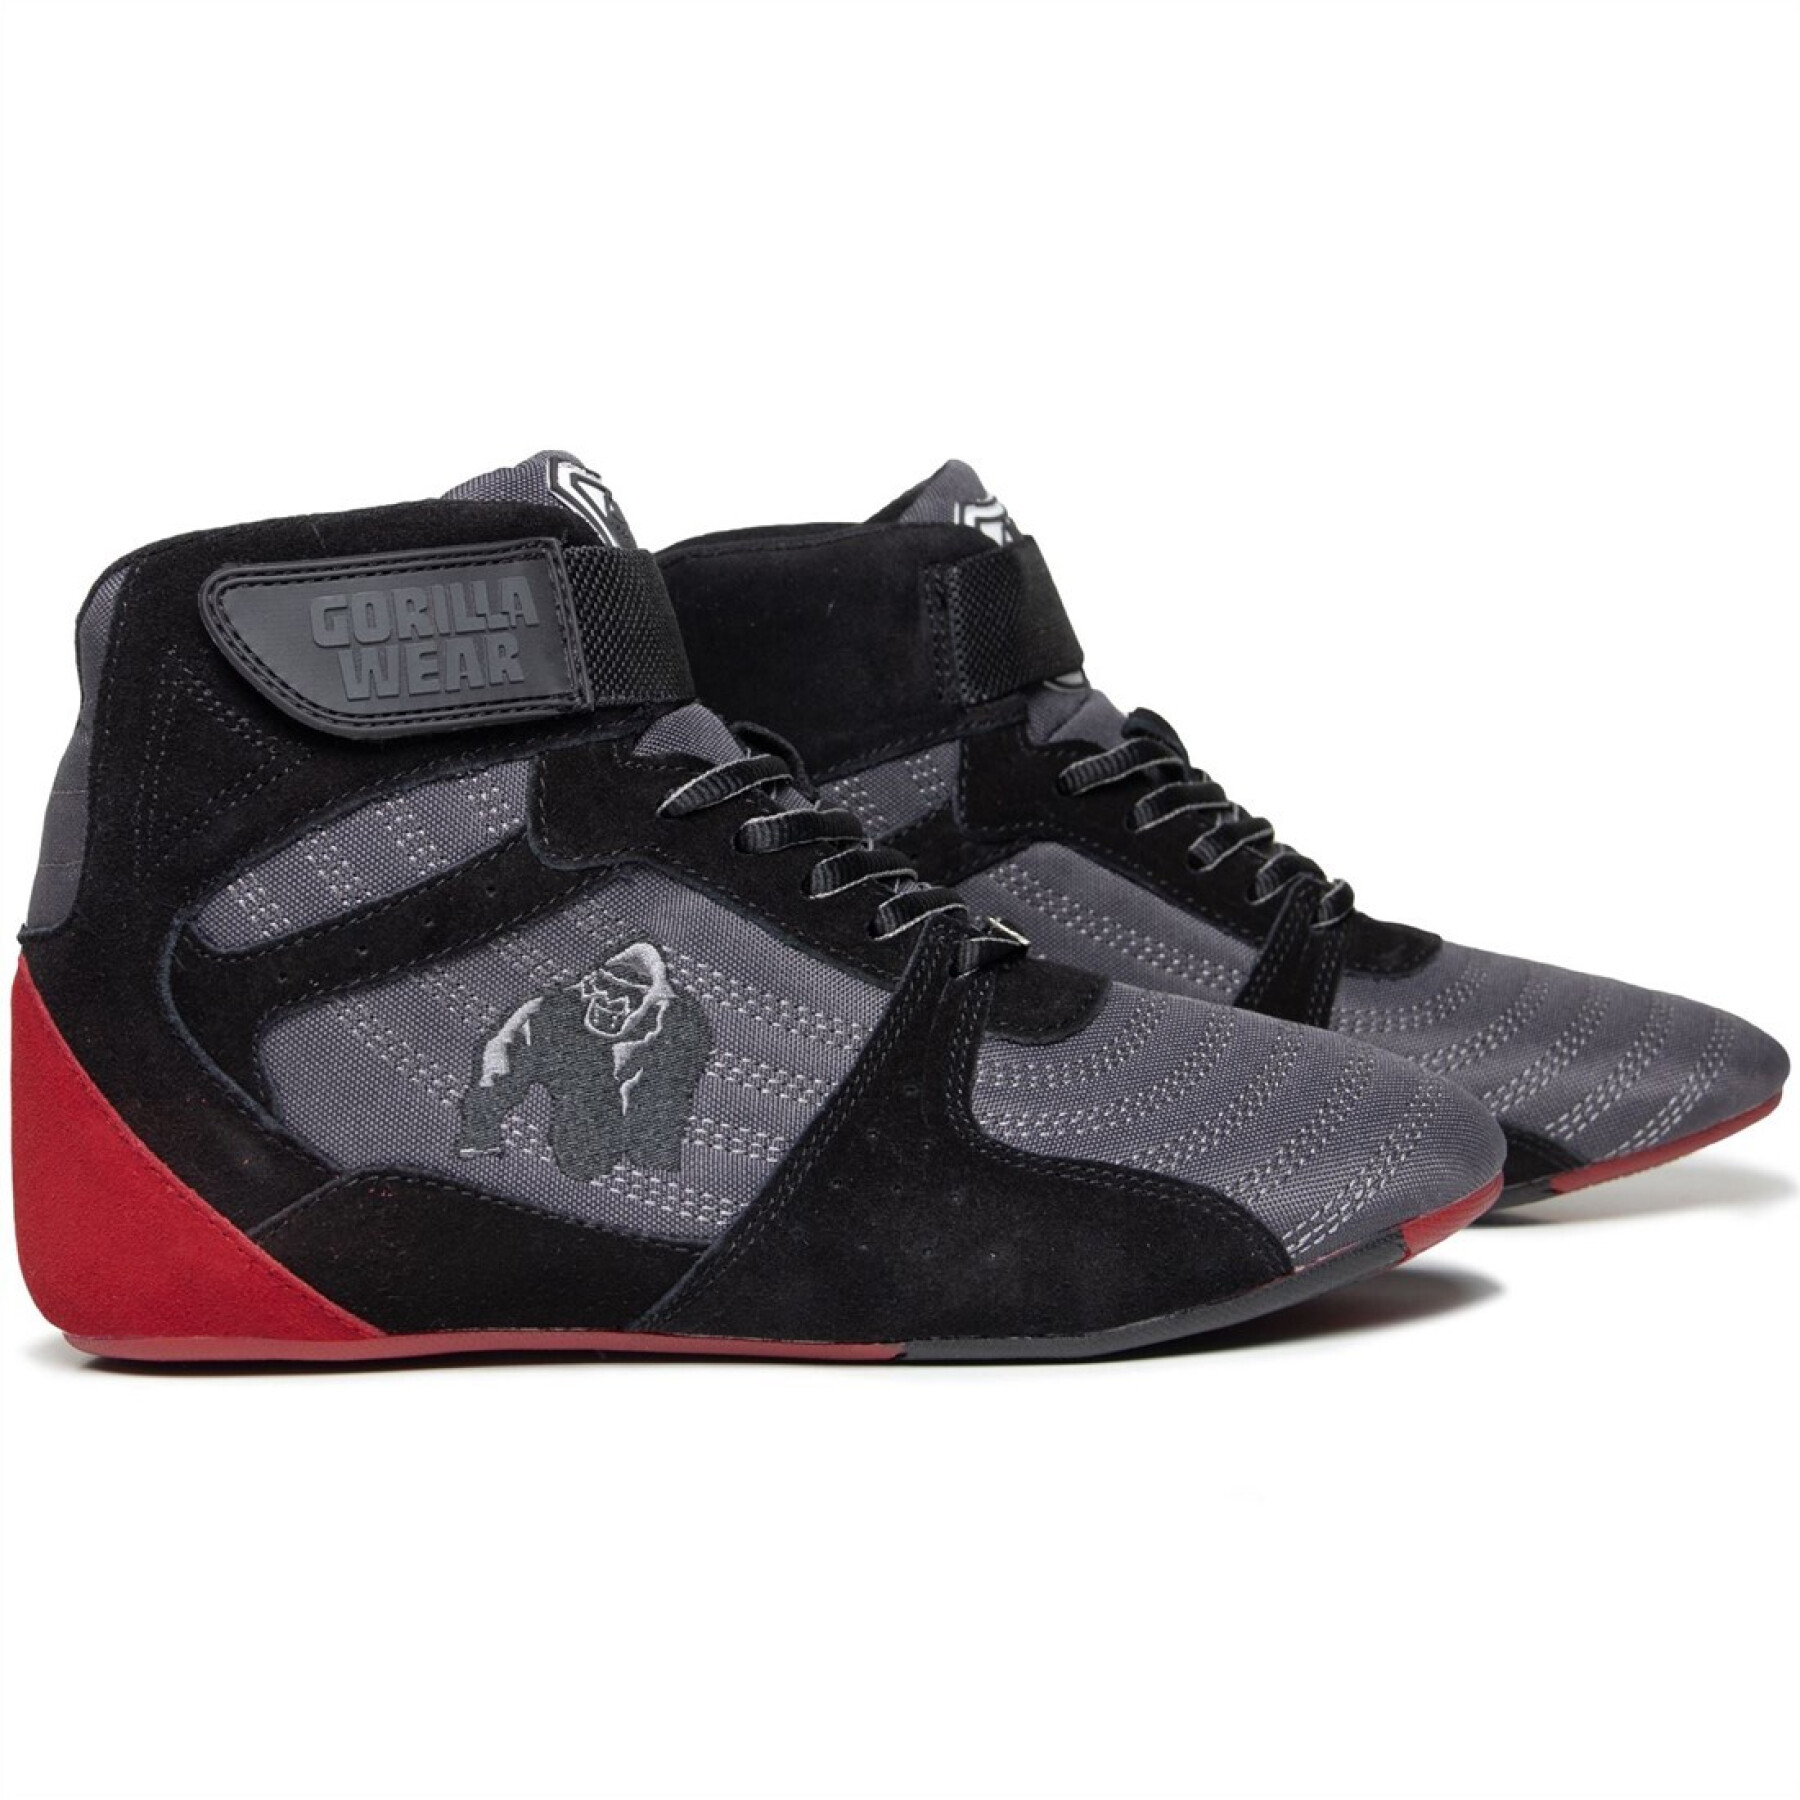 Chaussures training Gorilla Wear Perry Pro